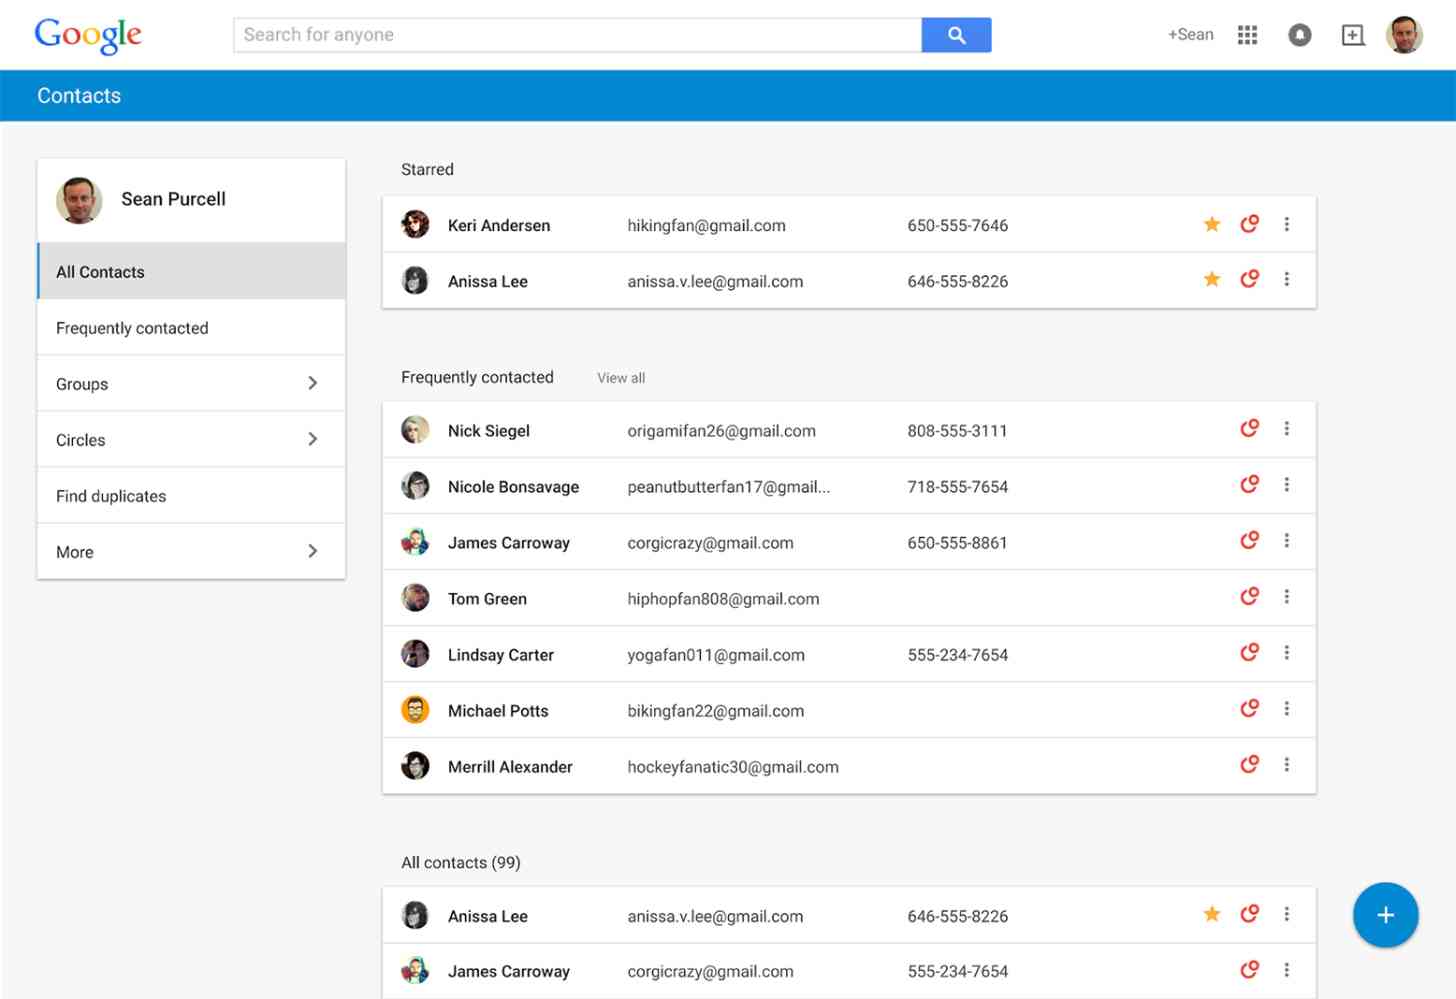 Google Contacts Material Design update